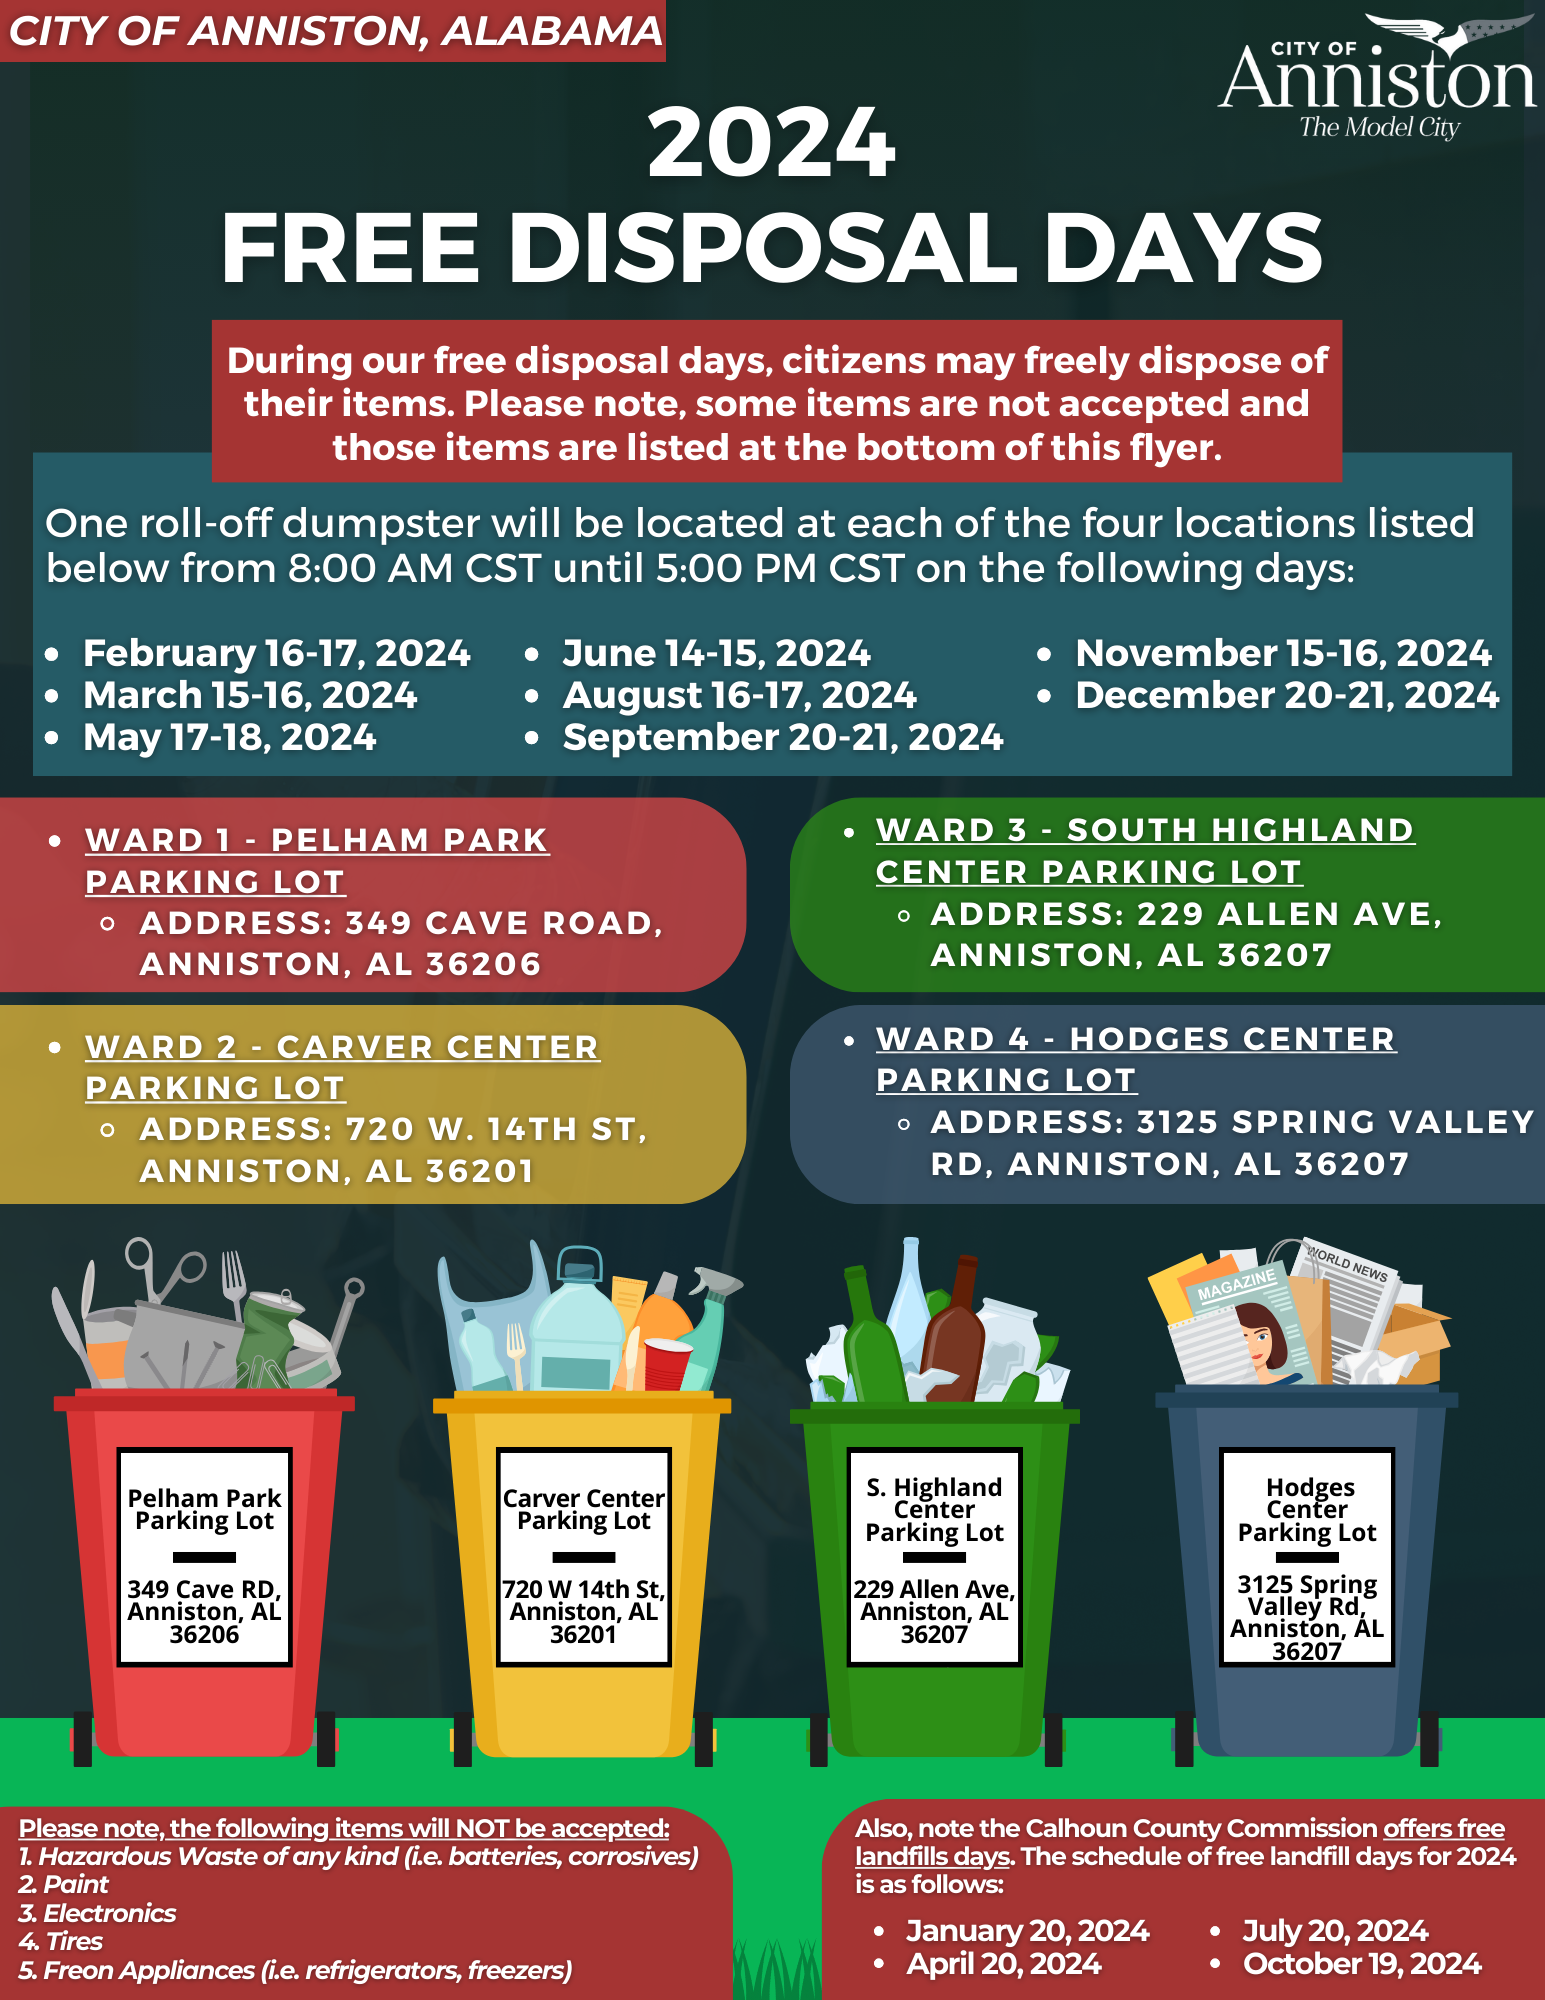 City of Anniston 2024 Free Disposal Disposal Day Schedule